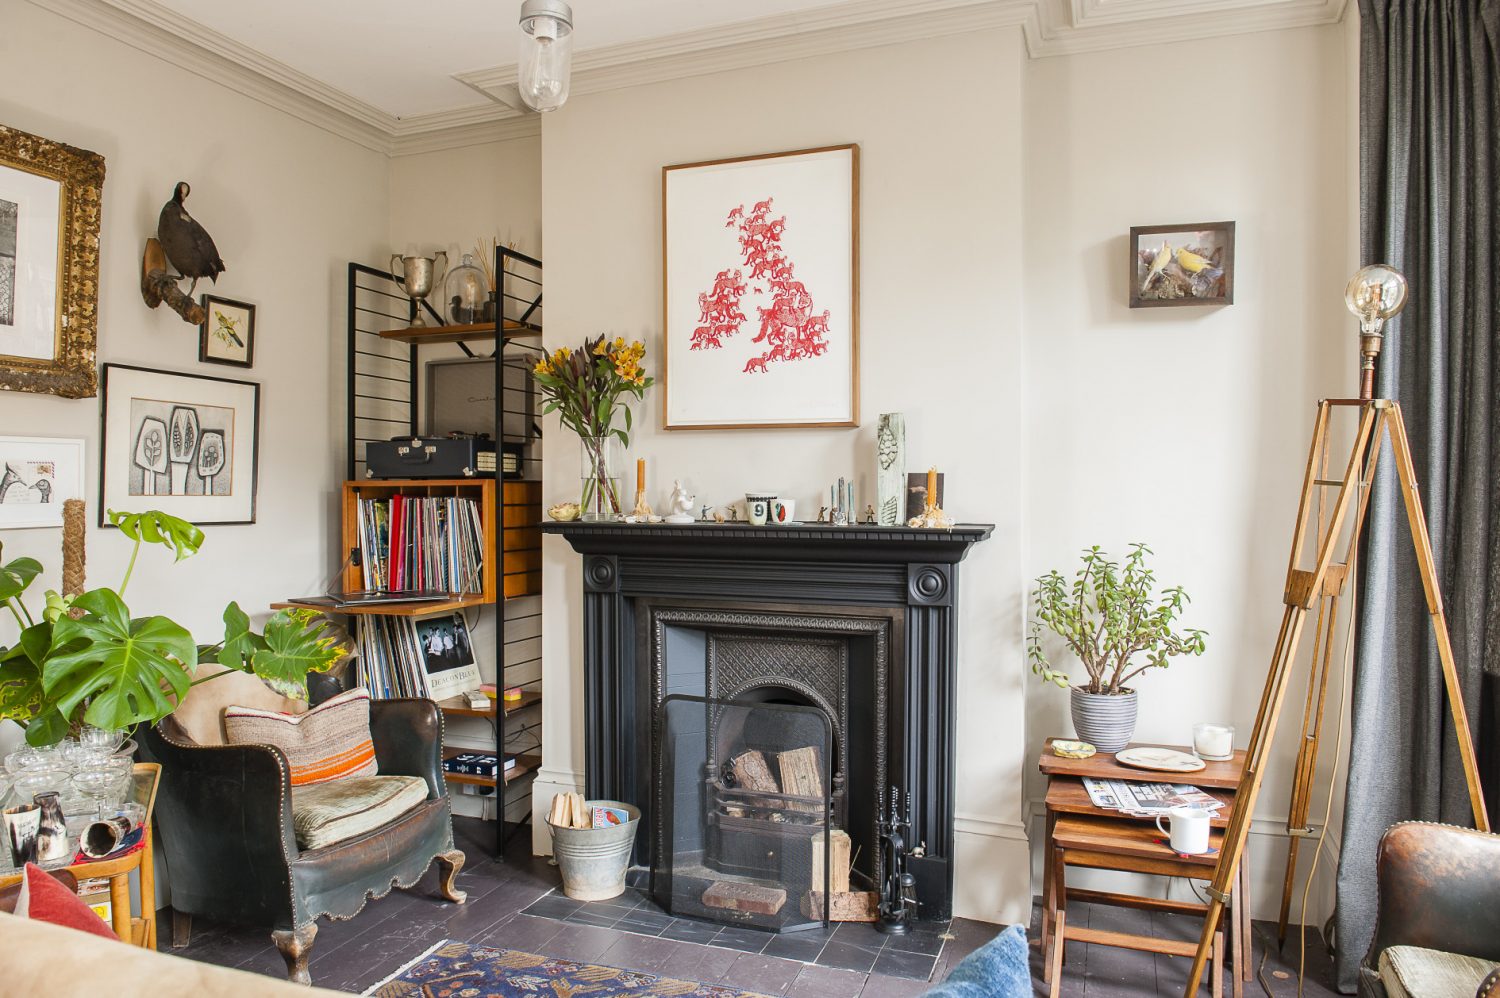 Above the fireplace in the living room hangs a UK map made out of foxes by artist Patrick Thomas. The ceramics on the mantelpiece are from The Clay Den in Hastings